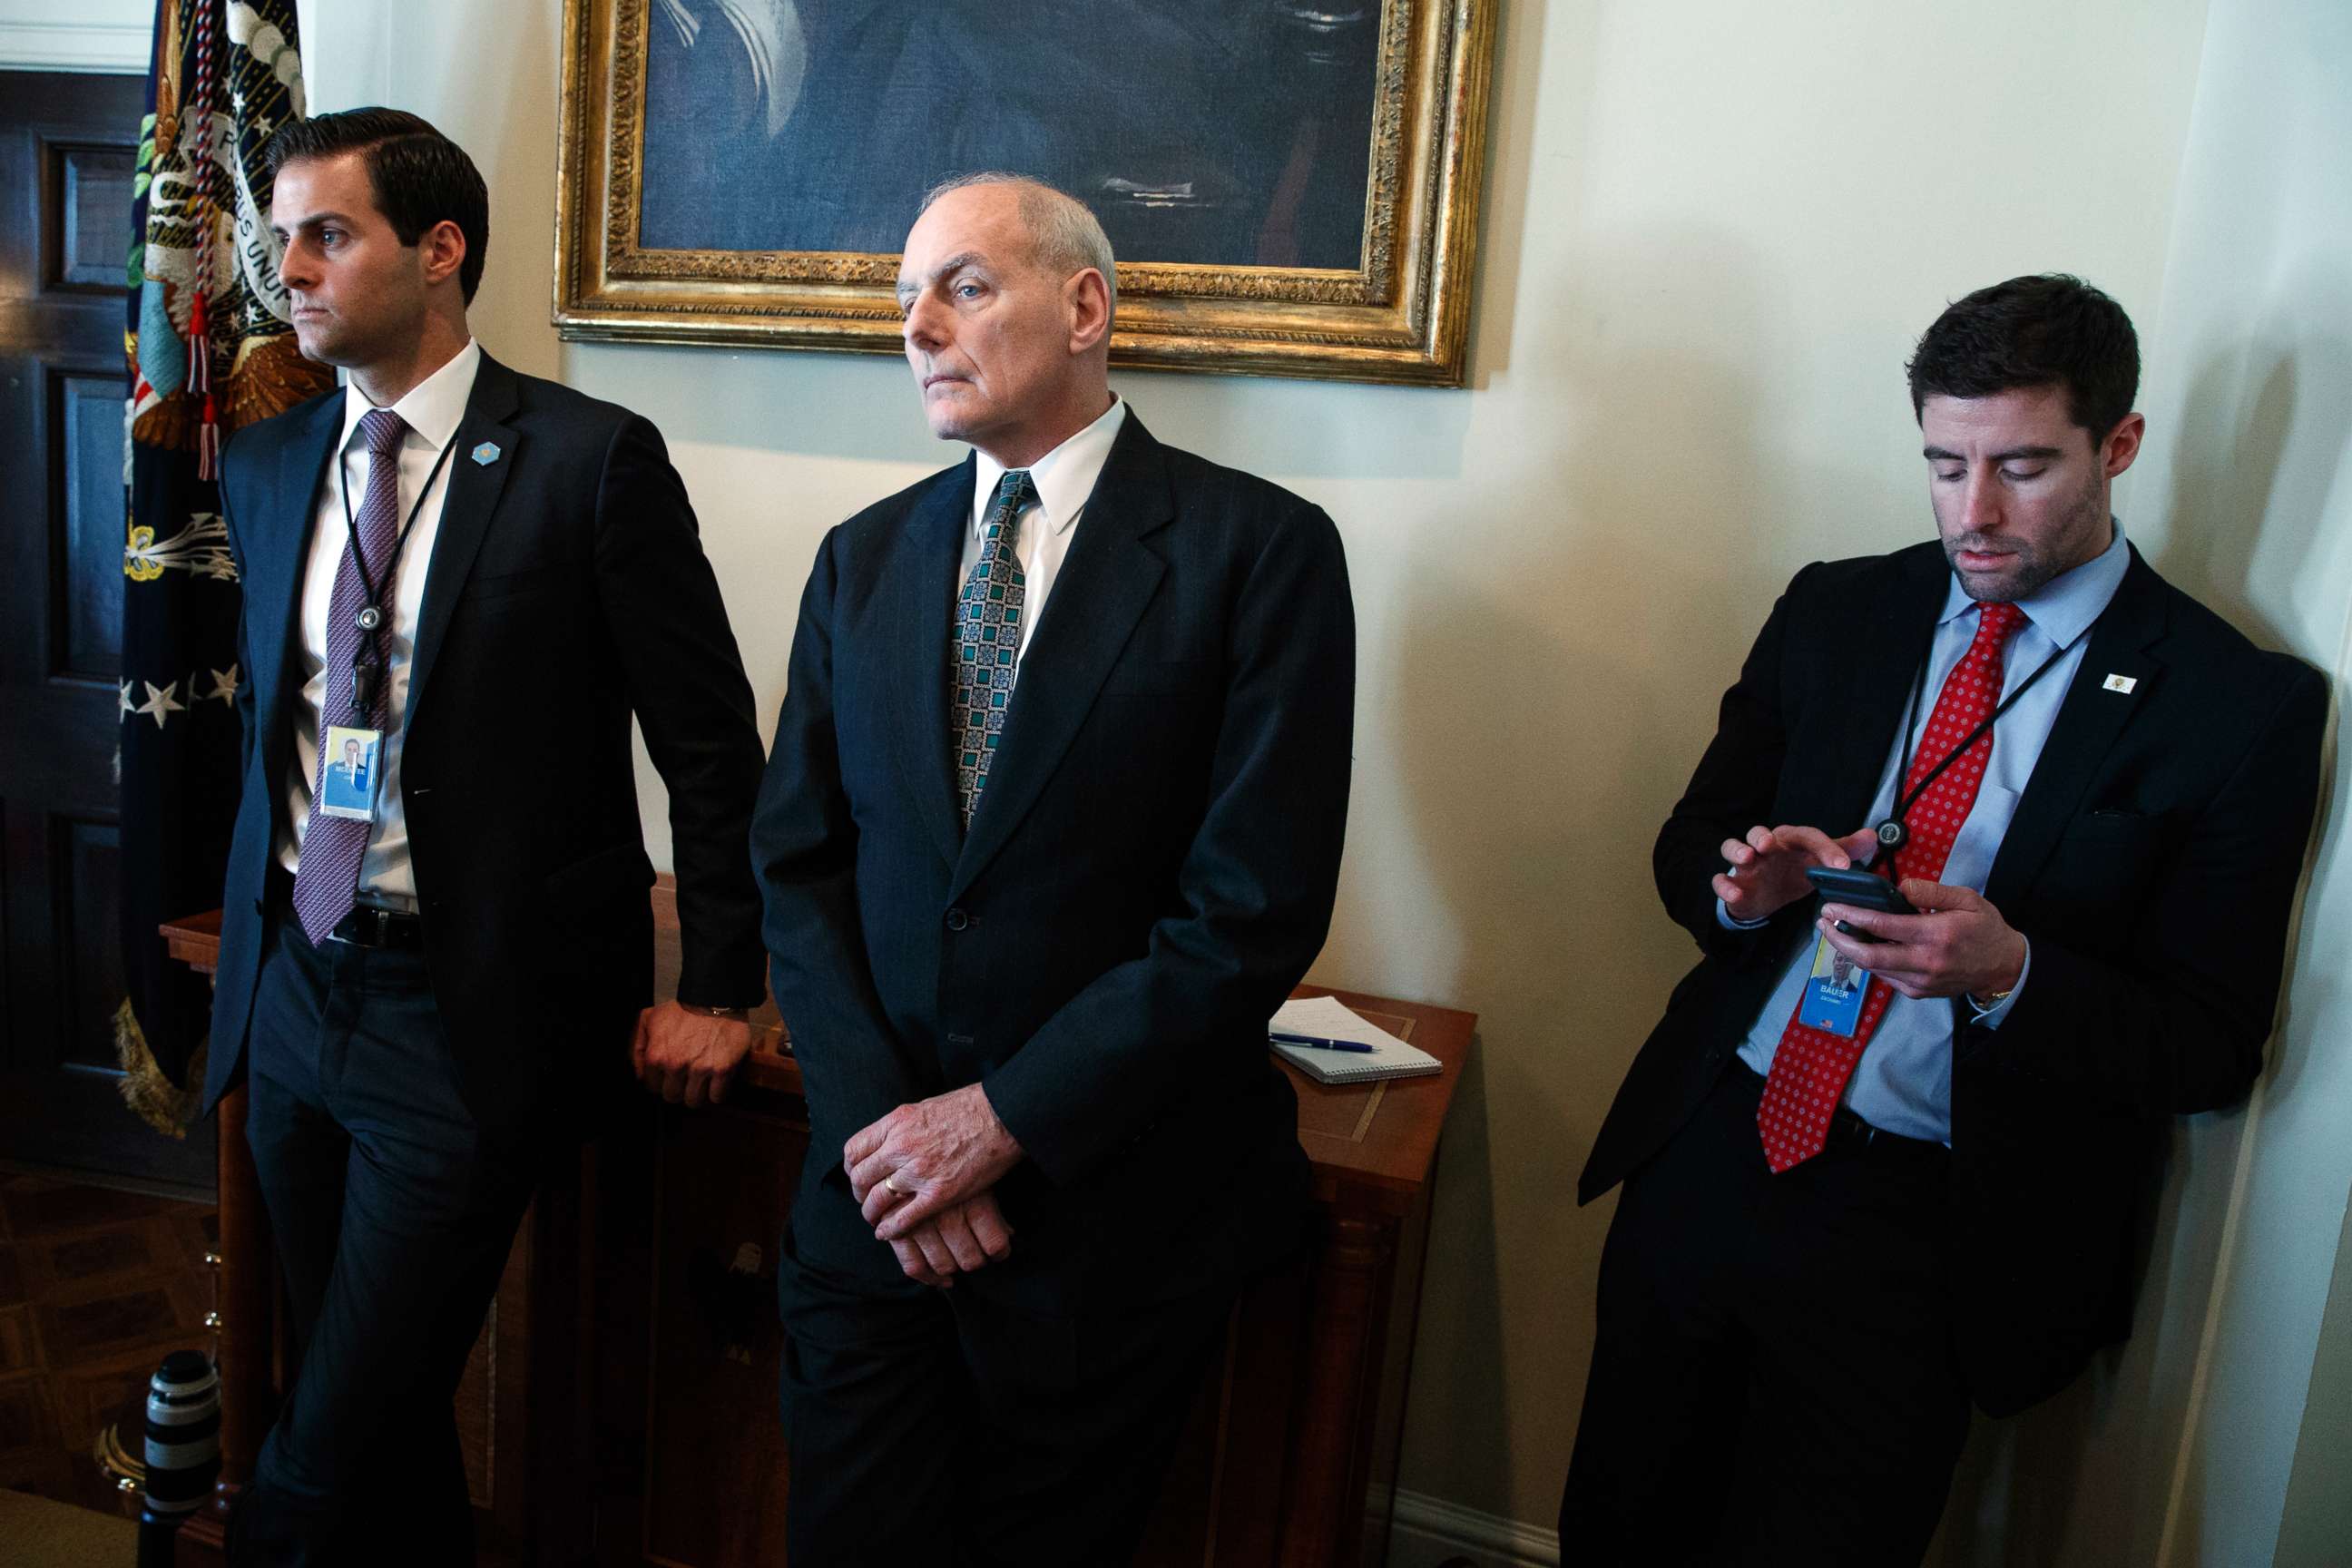 PHOTO: John McEntee and John Kelly listen as President Donald Trump speaks during a meeting with lawmakers about trade policy in the Cabinet Room of the White House, Tuesday, Feb. 13, 2018, in Washington.